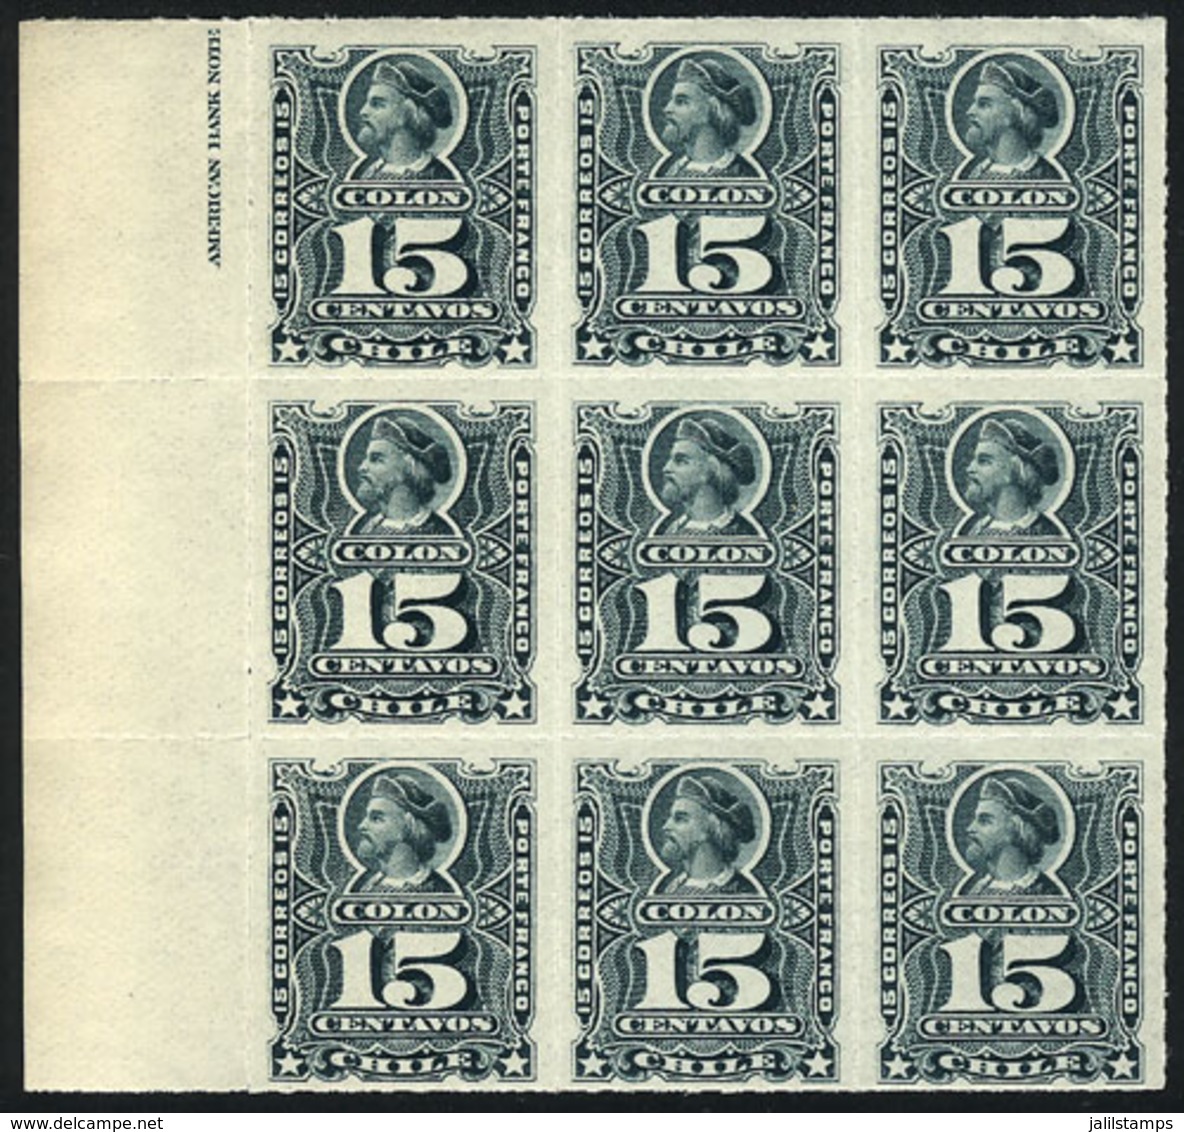 CHILE: Yv.26 (Sc.30), Fantastic Marginal Block Of 9, MNH, As Fresh As The Day It Was Printed, Superb! - Chili